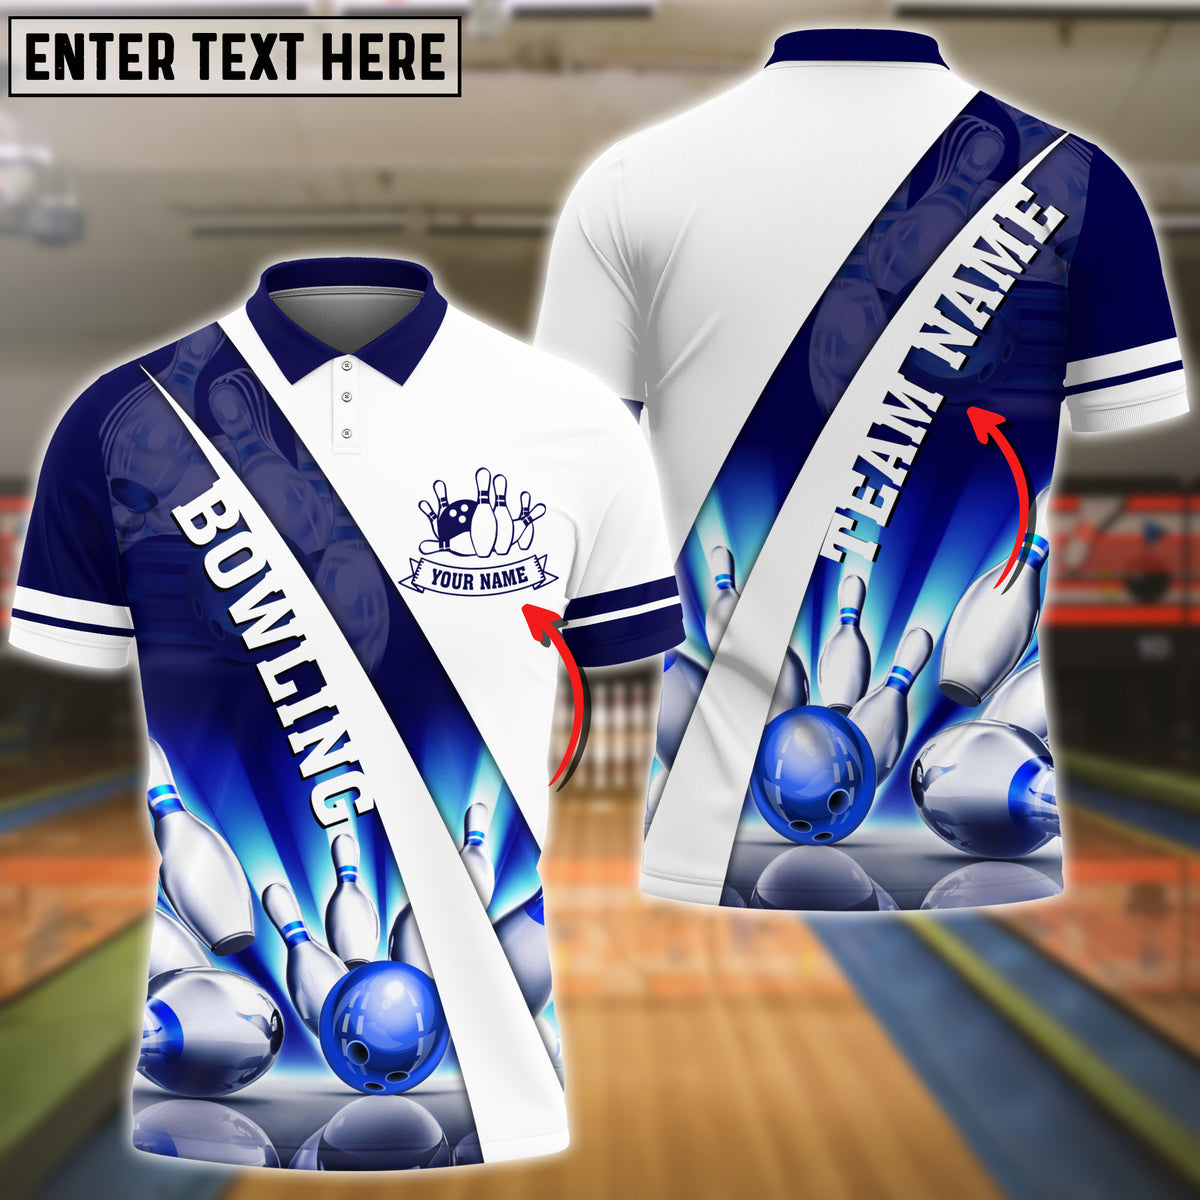 Maxcorners Light Blue Bowling And Pins Premium Customized Name 3D Shir